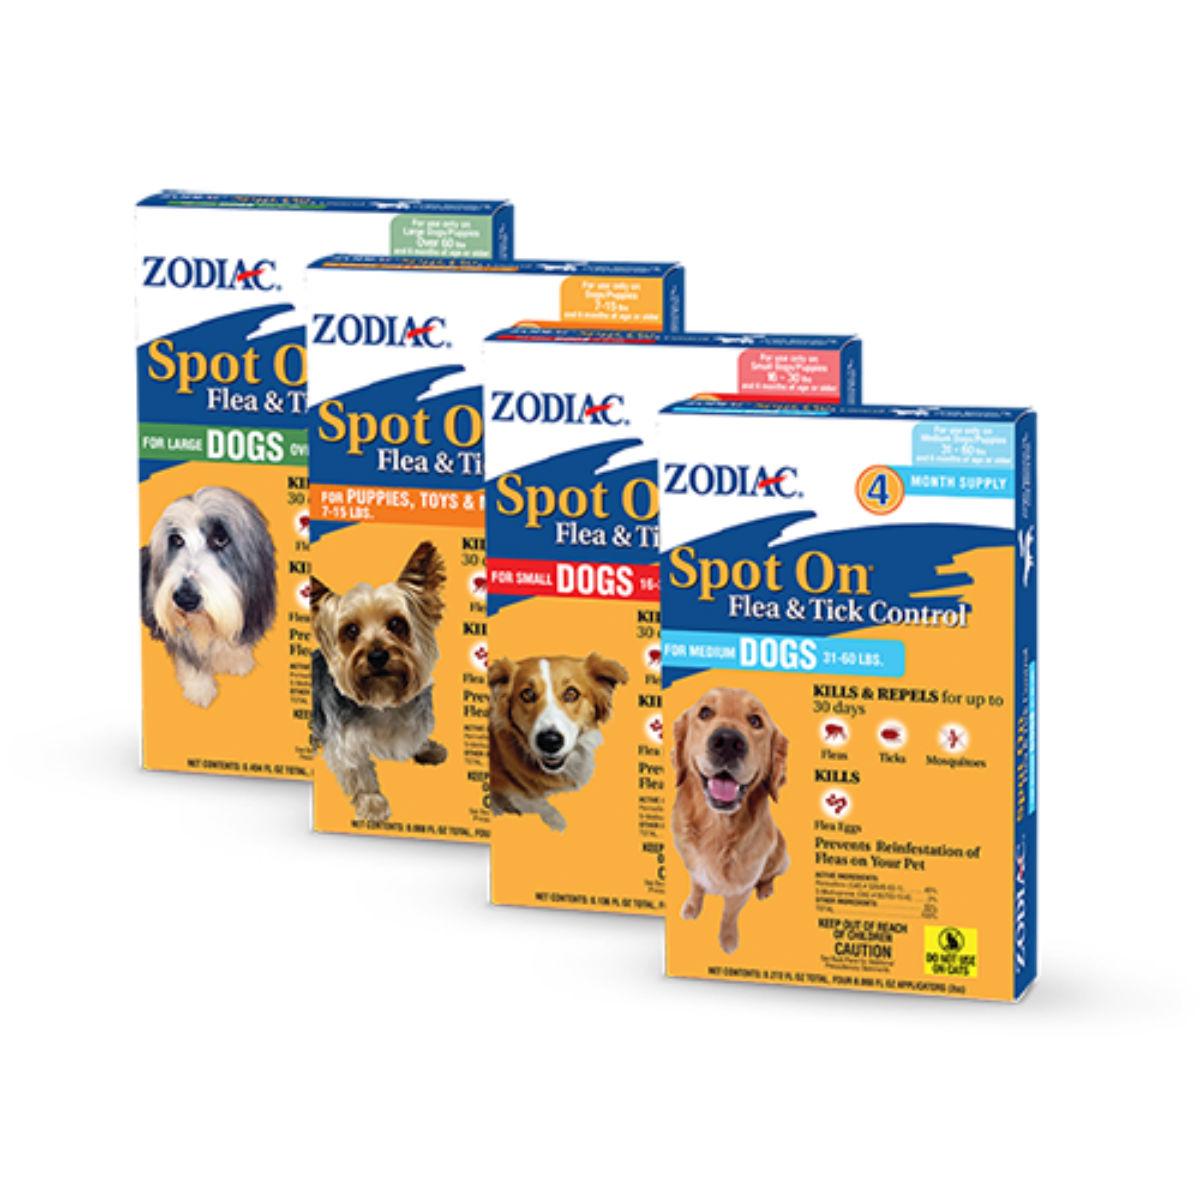 Zodiac Spot On Flea & Tick Control for Dogs and Puppies